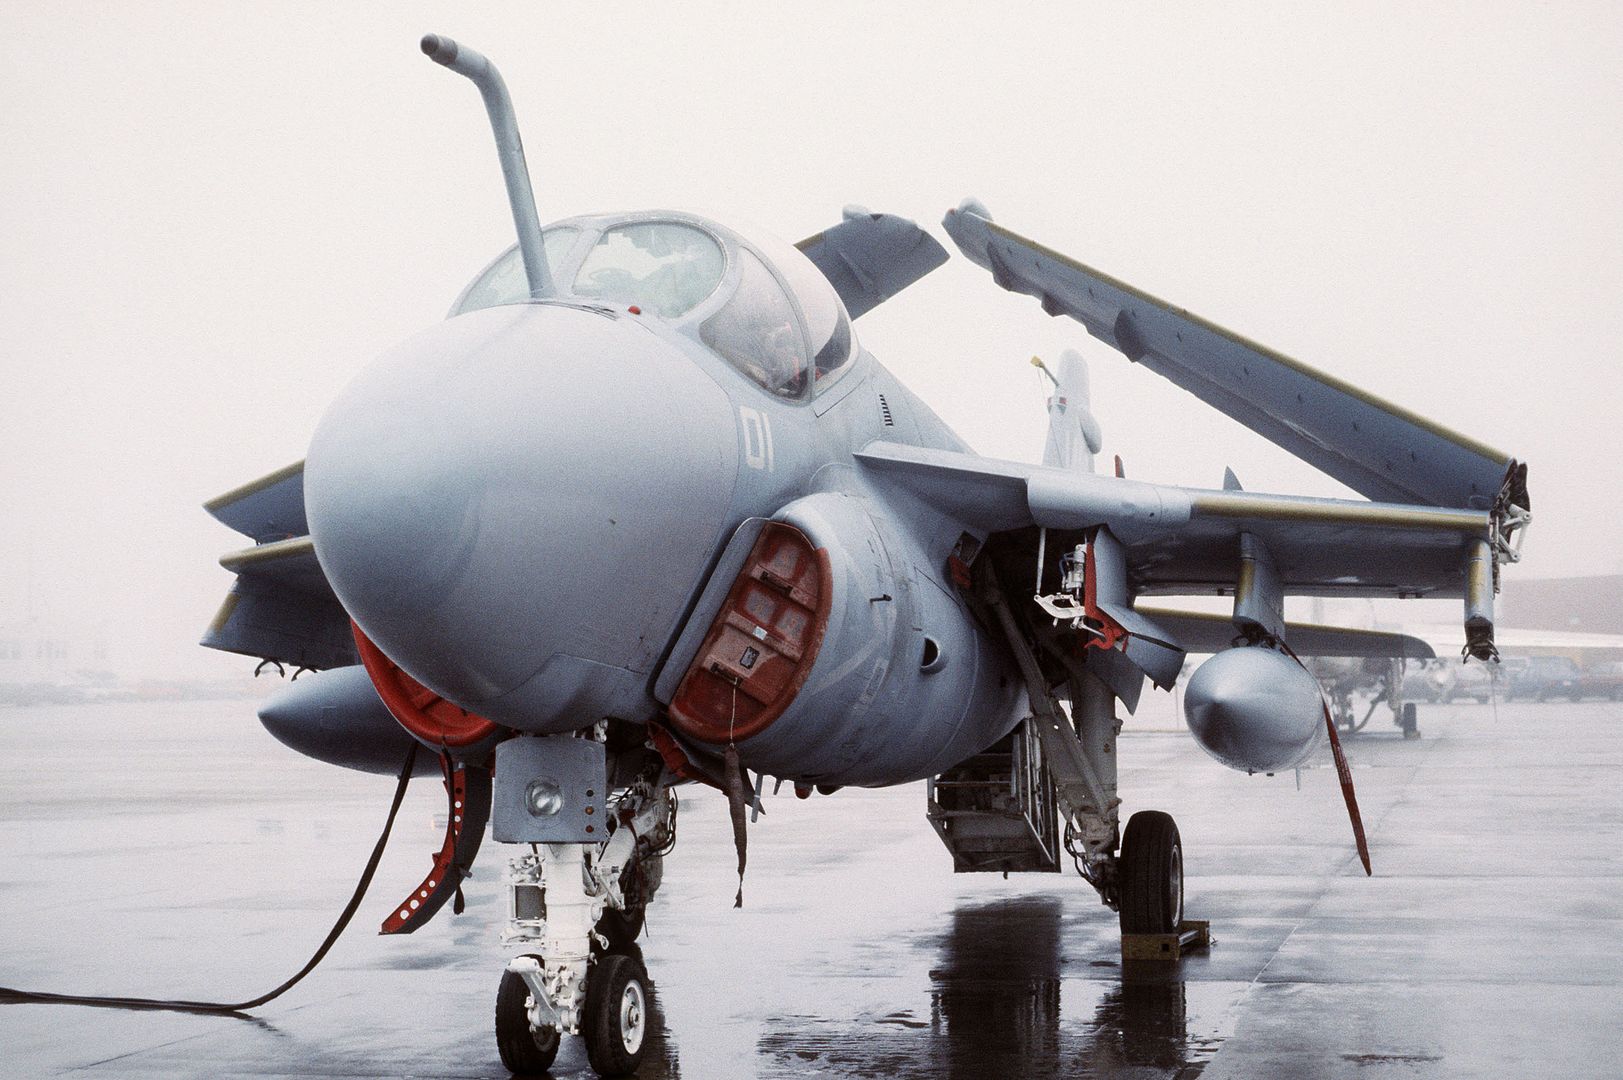 A 6 Intruder Aircraft From The Marine All Weather Medium Attack Squadron 224 Parked On The Flight Line 3